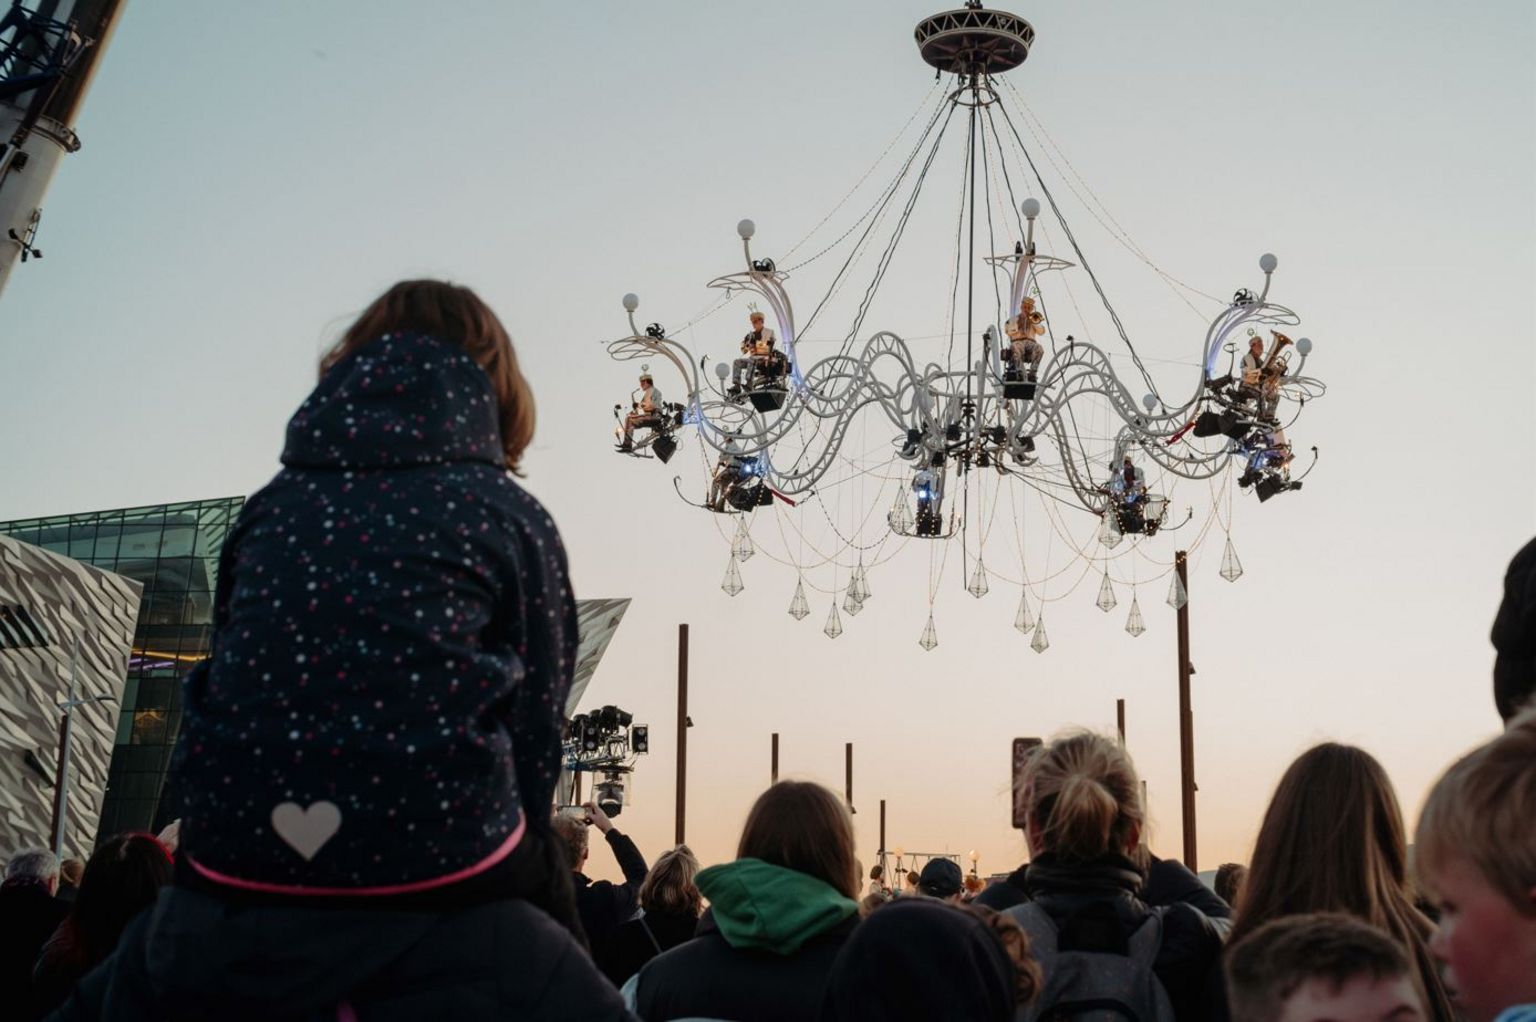 Crowd watching giant chandelier with orchestra performing